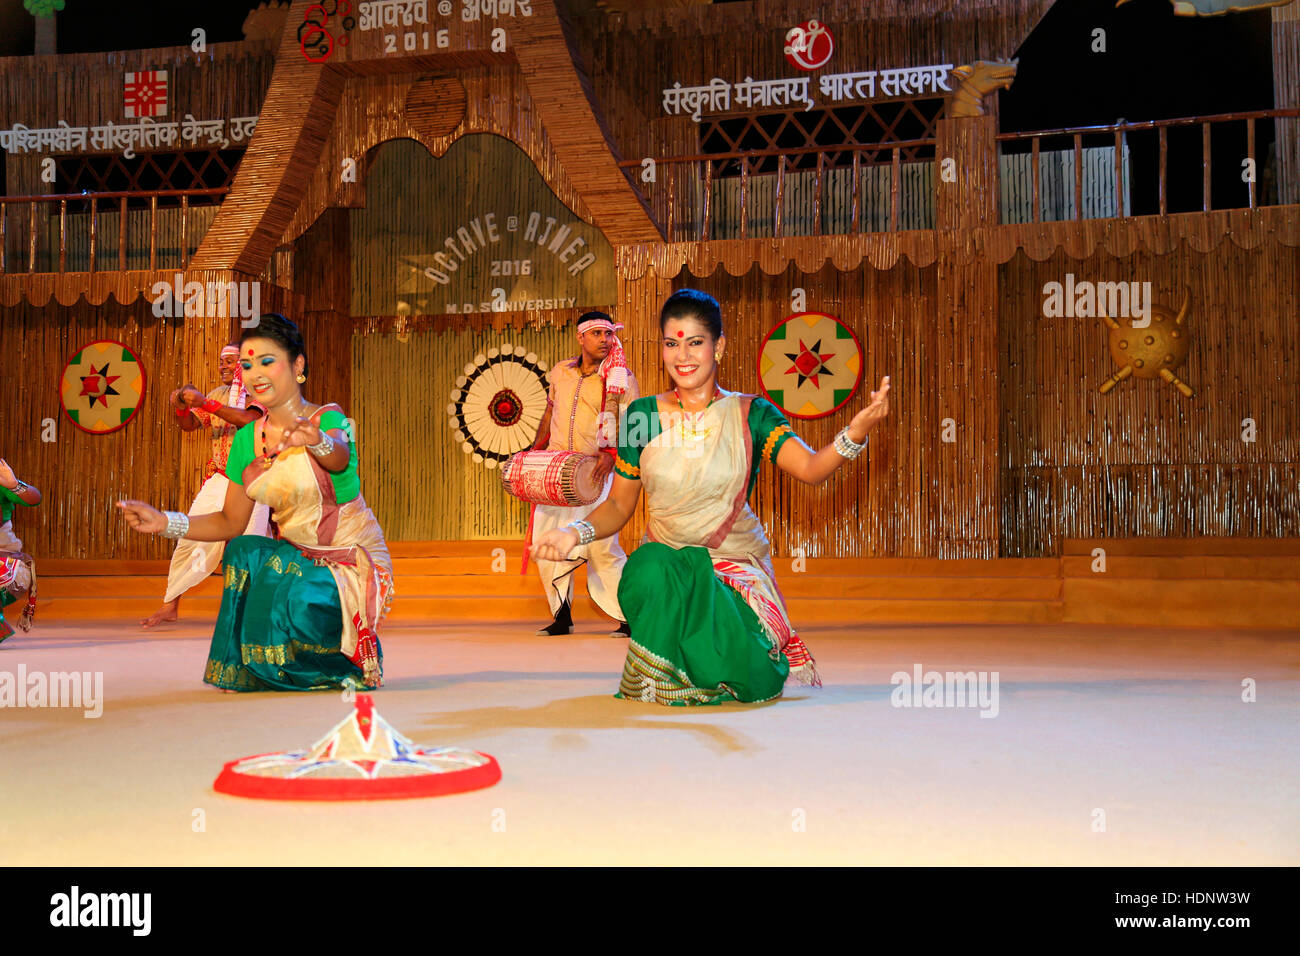 Tribal dancers From Assam performing Traditional Bodo dance Of Assam. Tribal Festival in Ajmer, Rajasthan, India Stock Photo